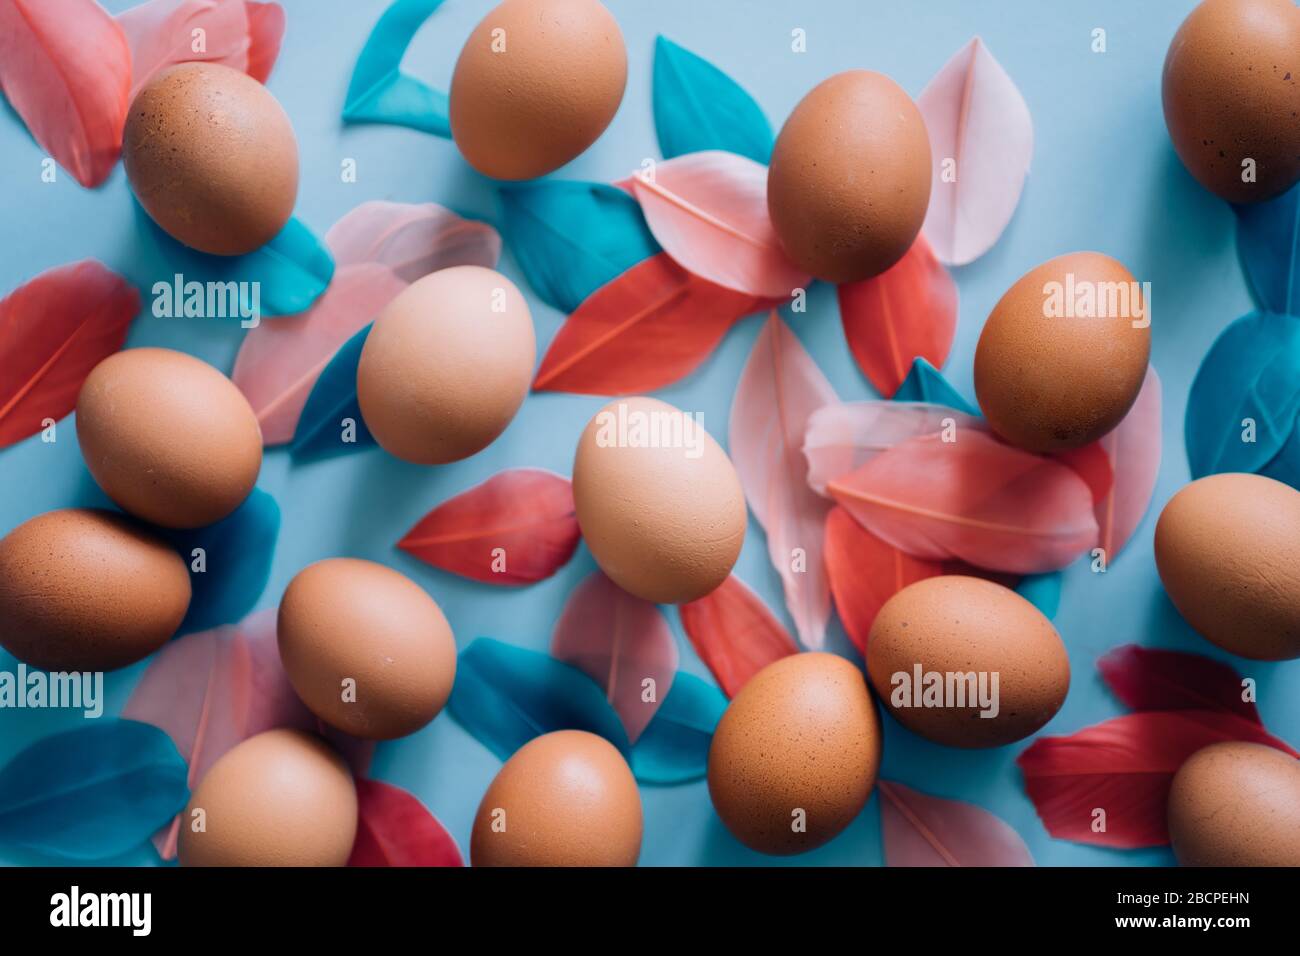 Chicken brown eggs and multicolored fluffy bird's feathers on light blue background. Happy Easter concept, flat lay composition. Top view. Stock Photo